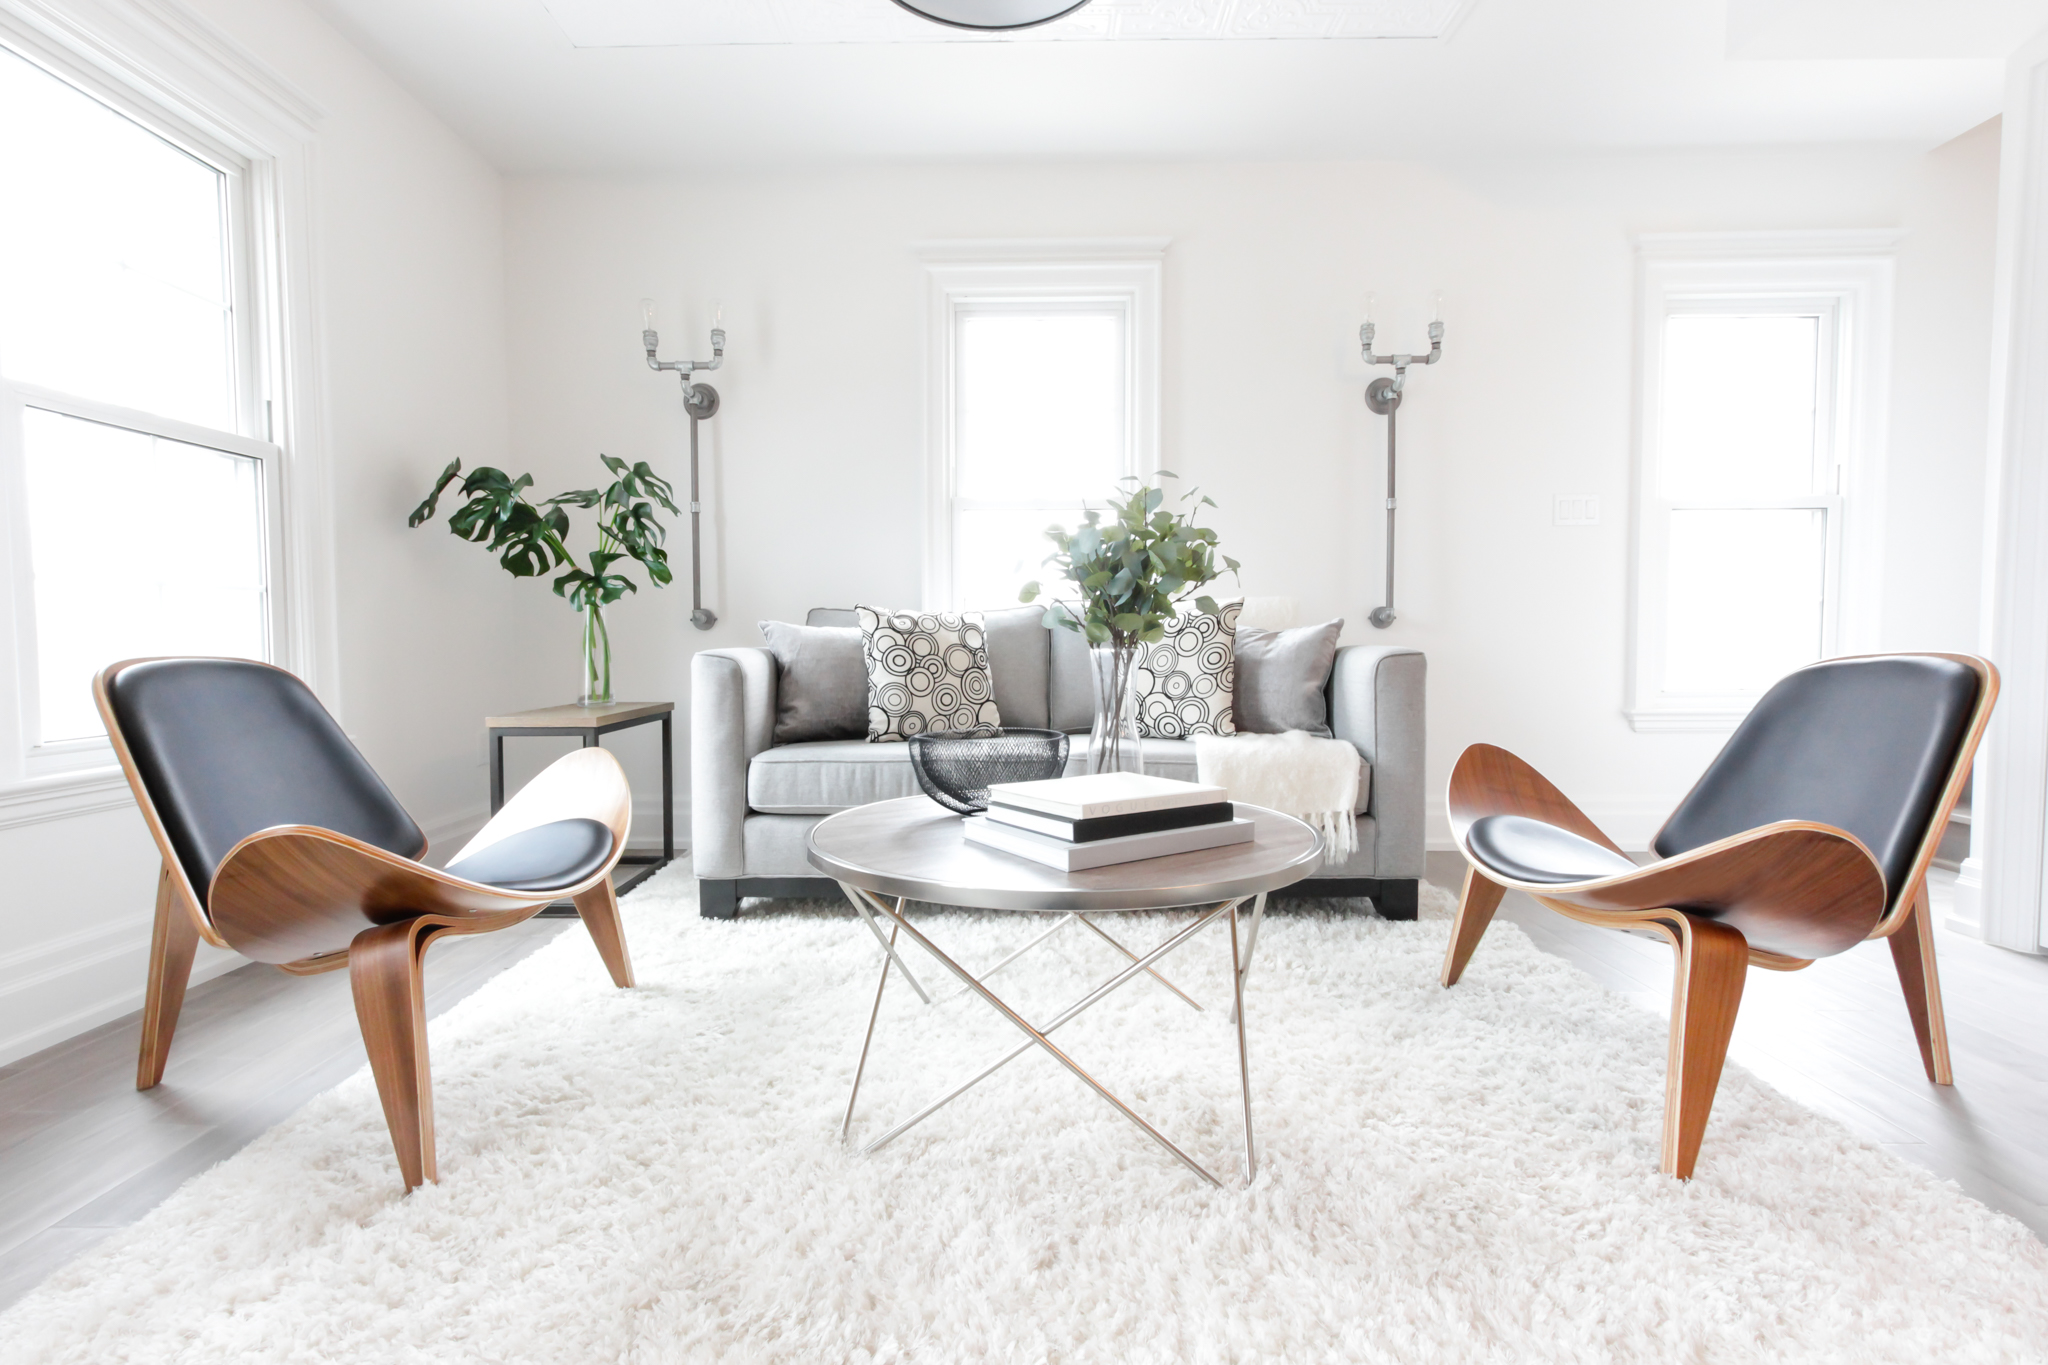 Living Room Home Staging in Barrie. Cool modern chairs add style and sophistication to this home for sale